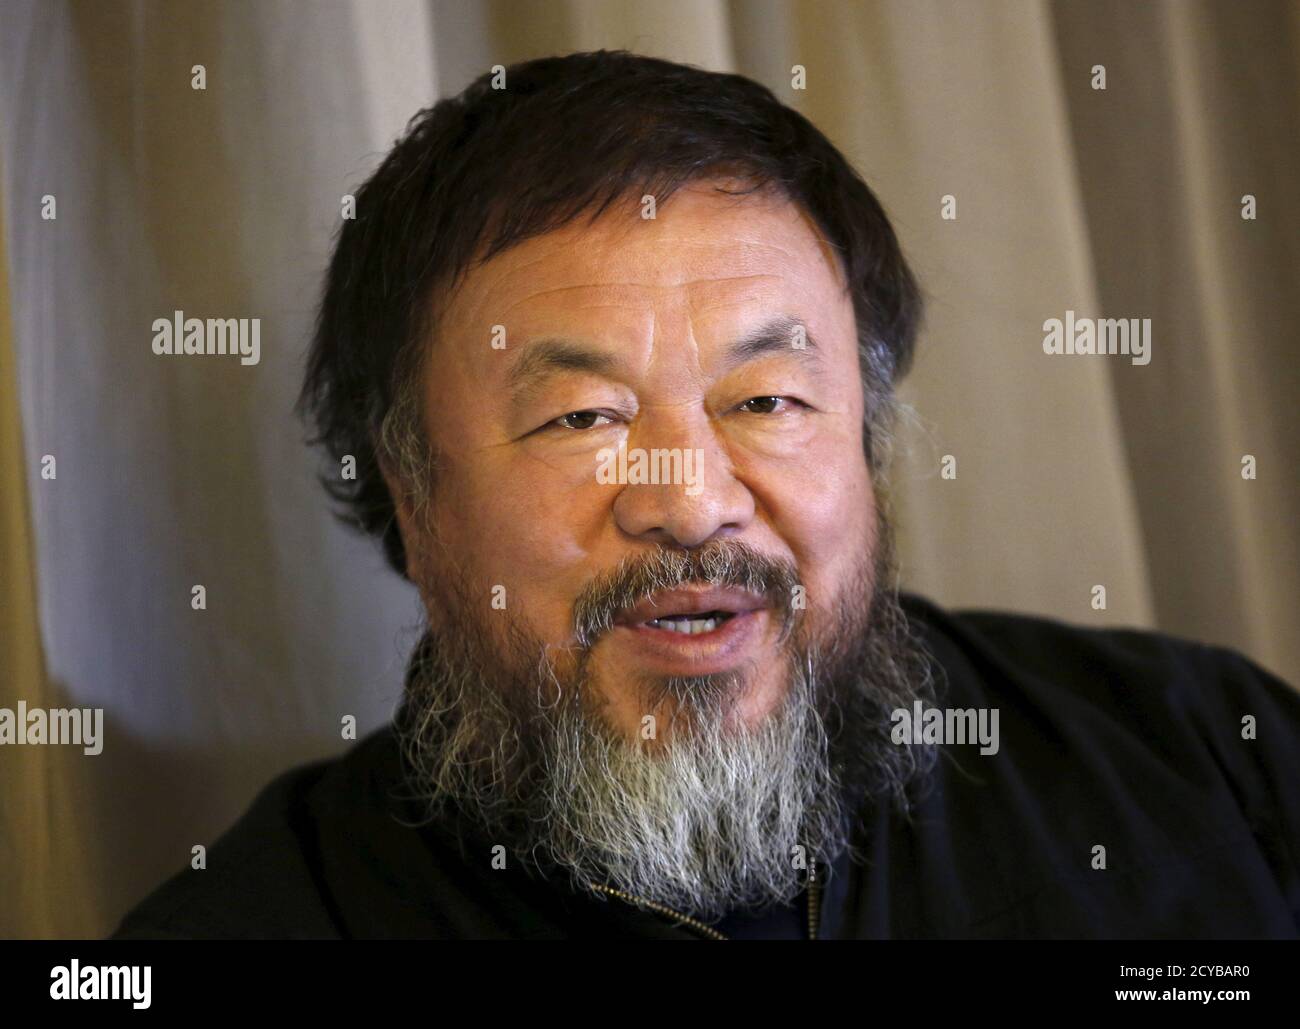 Dissident Chinese artist Ai Weiwei speaks during an interview with Reuters at his hotel in Beijing March 24, 2015. Amnesty International has given its top 2015 human rights award to both Chinese dissident artist Ai Weiwei, a fierce critic of Beijing who has been banned from leaving China after an 81-day detention in 2011, and U.S. folksinger Joan Baez.   REUTERS/Kim Kyung-Hoon Stock Photo